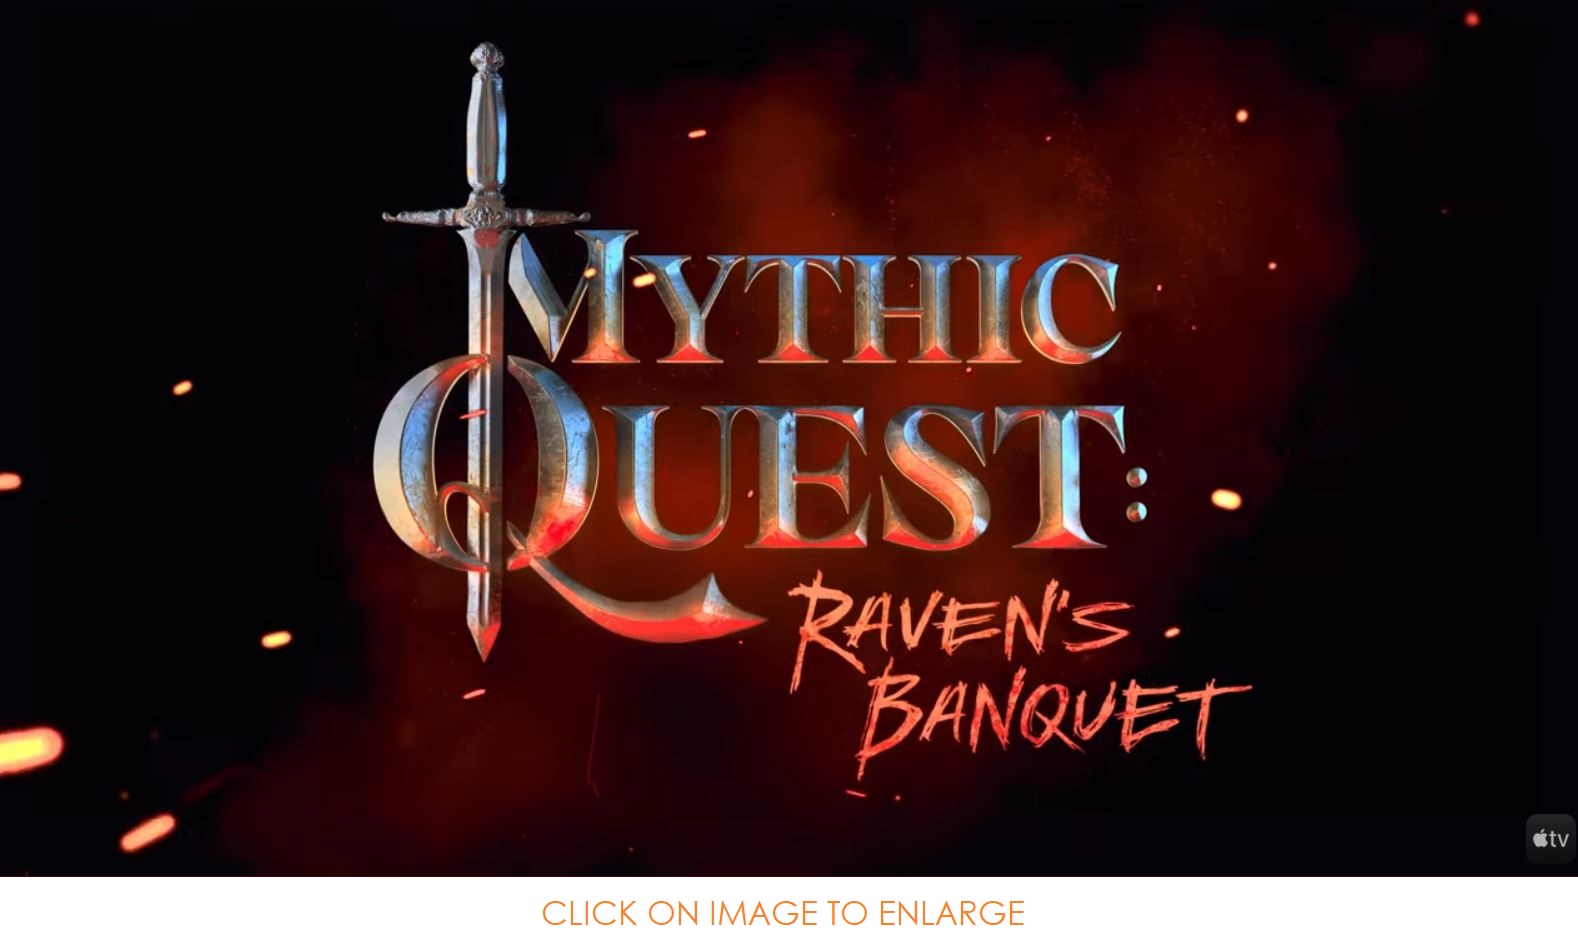 Mythic Quest Ravens Banquet Wallpapers